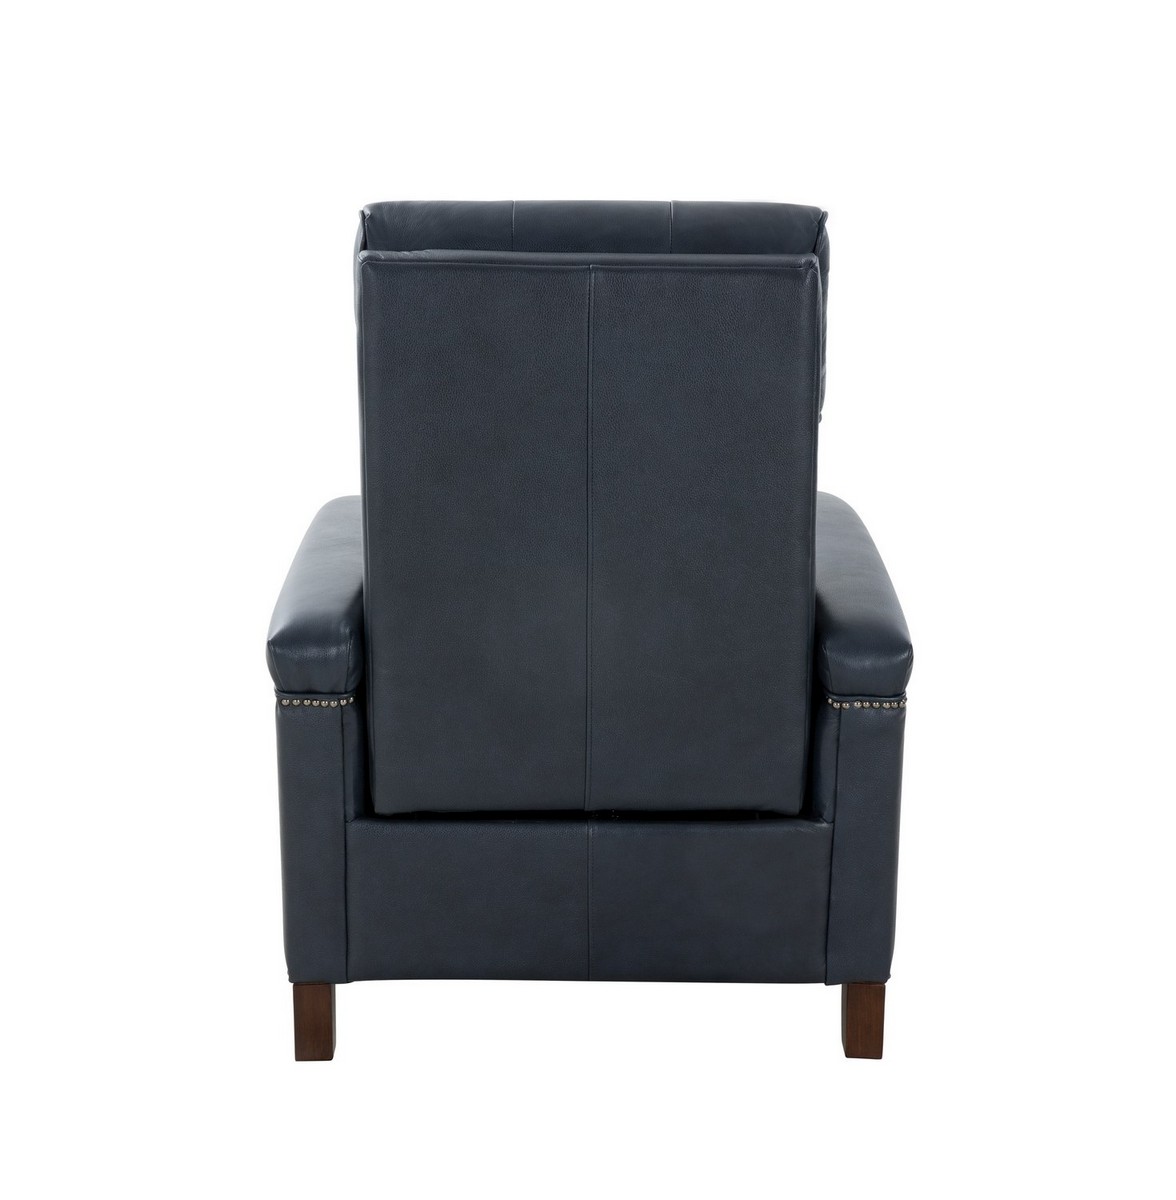 Barcalounger Jamey Zero Gravity Power Recliner Chair with Power Head Rest and Lumbar - Barone Navy Blue/All Leather